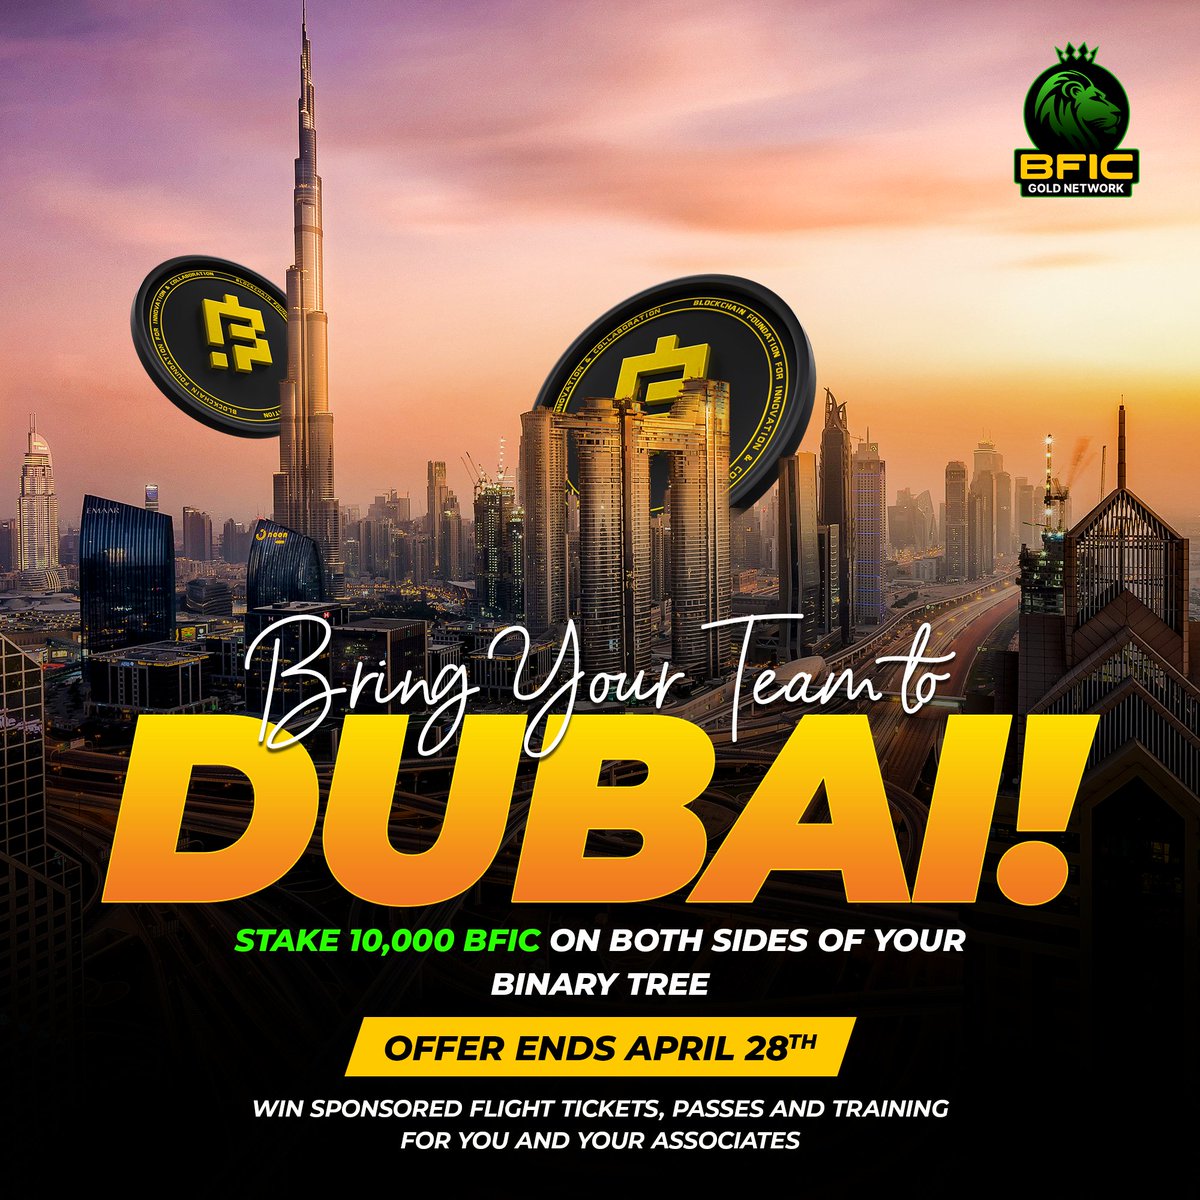 🚀 Ready for liftoff? Stake 10,000 BFIC on both sides of your binary tree and blast off to Dubai with your squad! 🌴 Hurry, the countdown to April 28th has begun. win sponsored flights, VIP access, and tailored training for you and your team! Dubai's calling – answer the call! .…